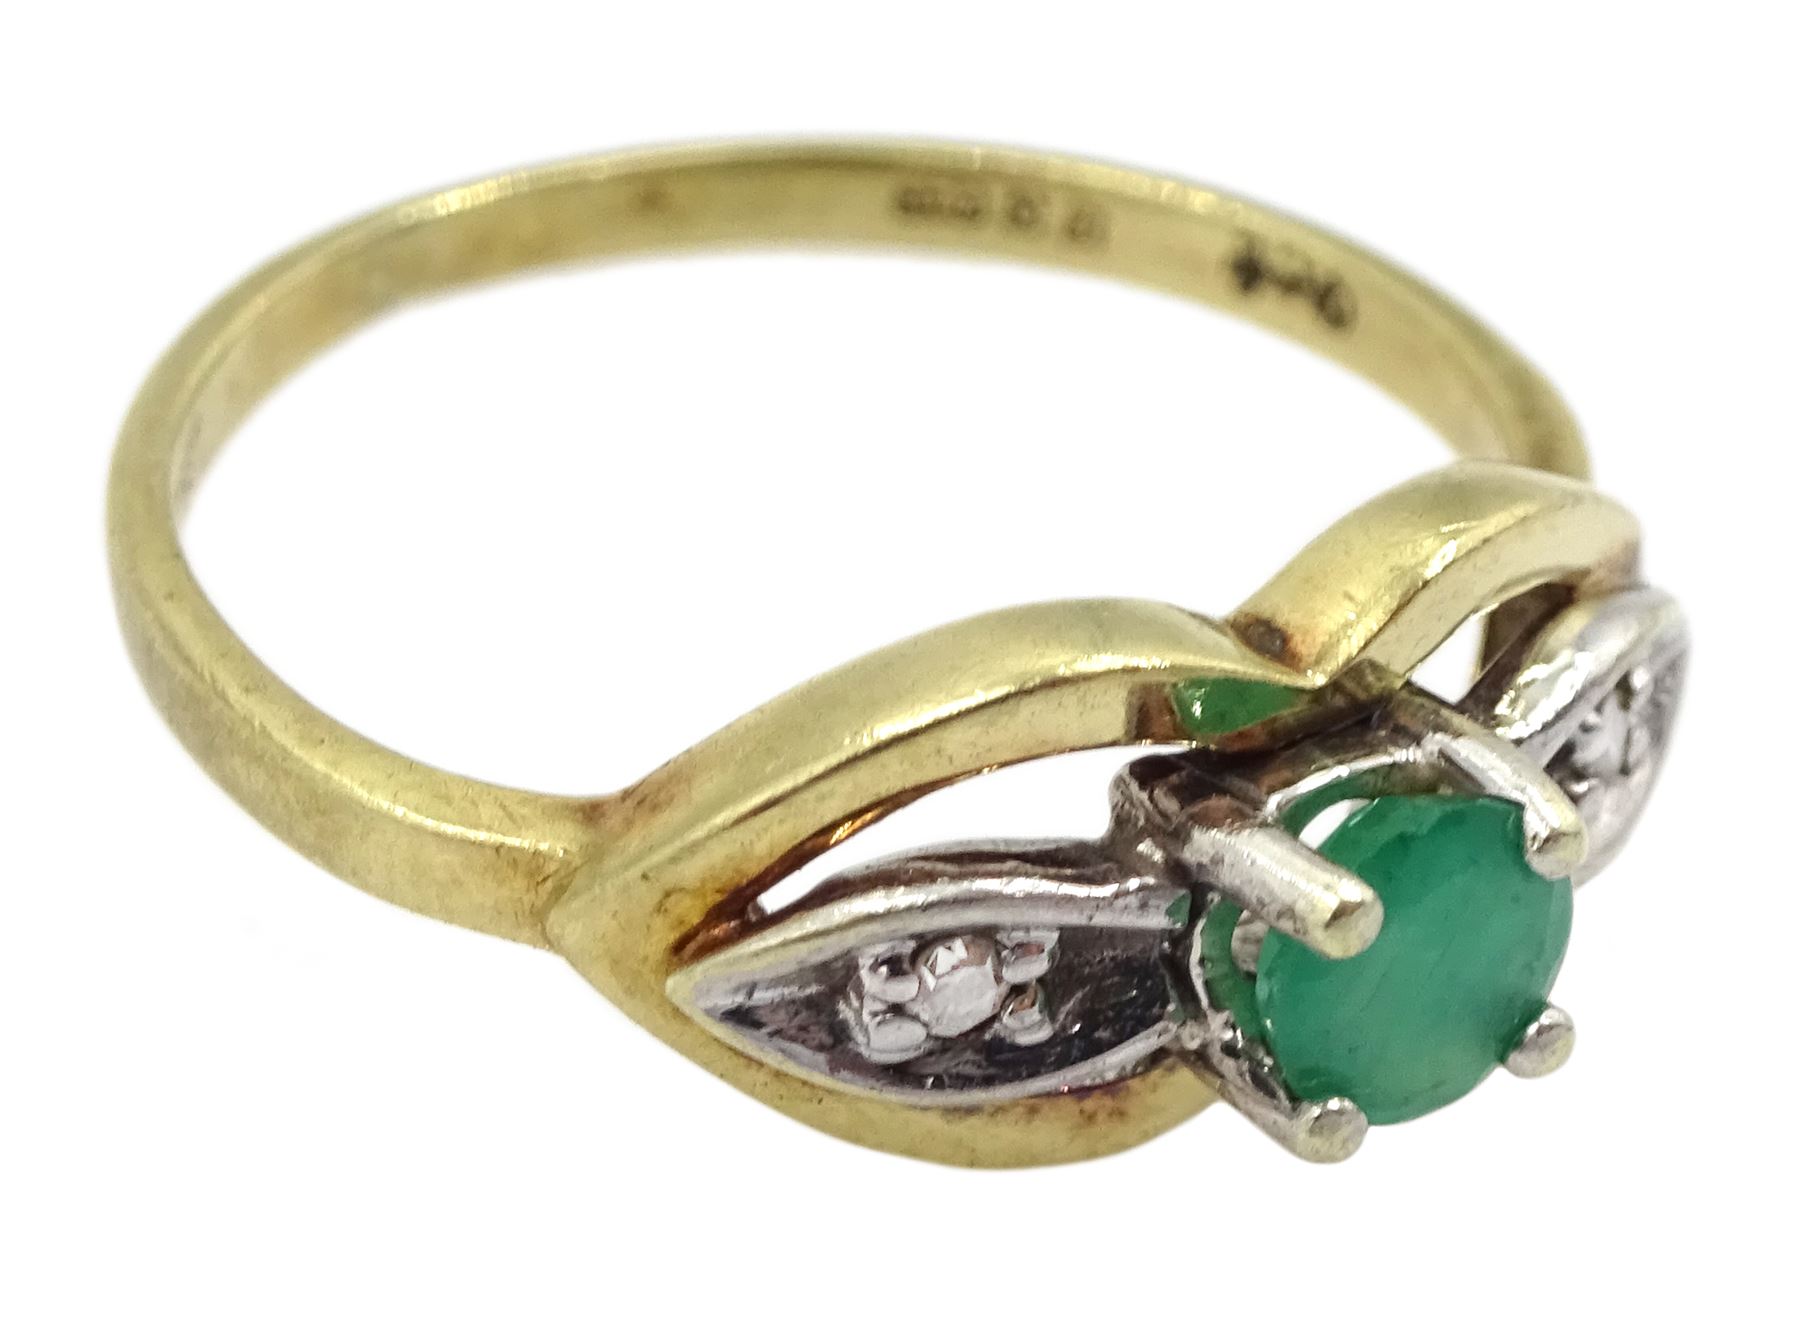 9ct gold round emerald and diamond ring - Image 3 of 4